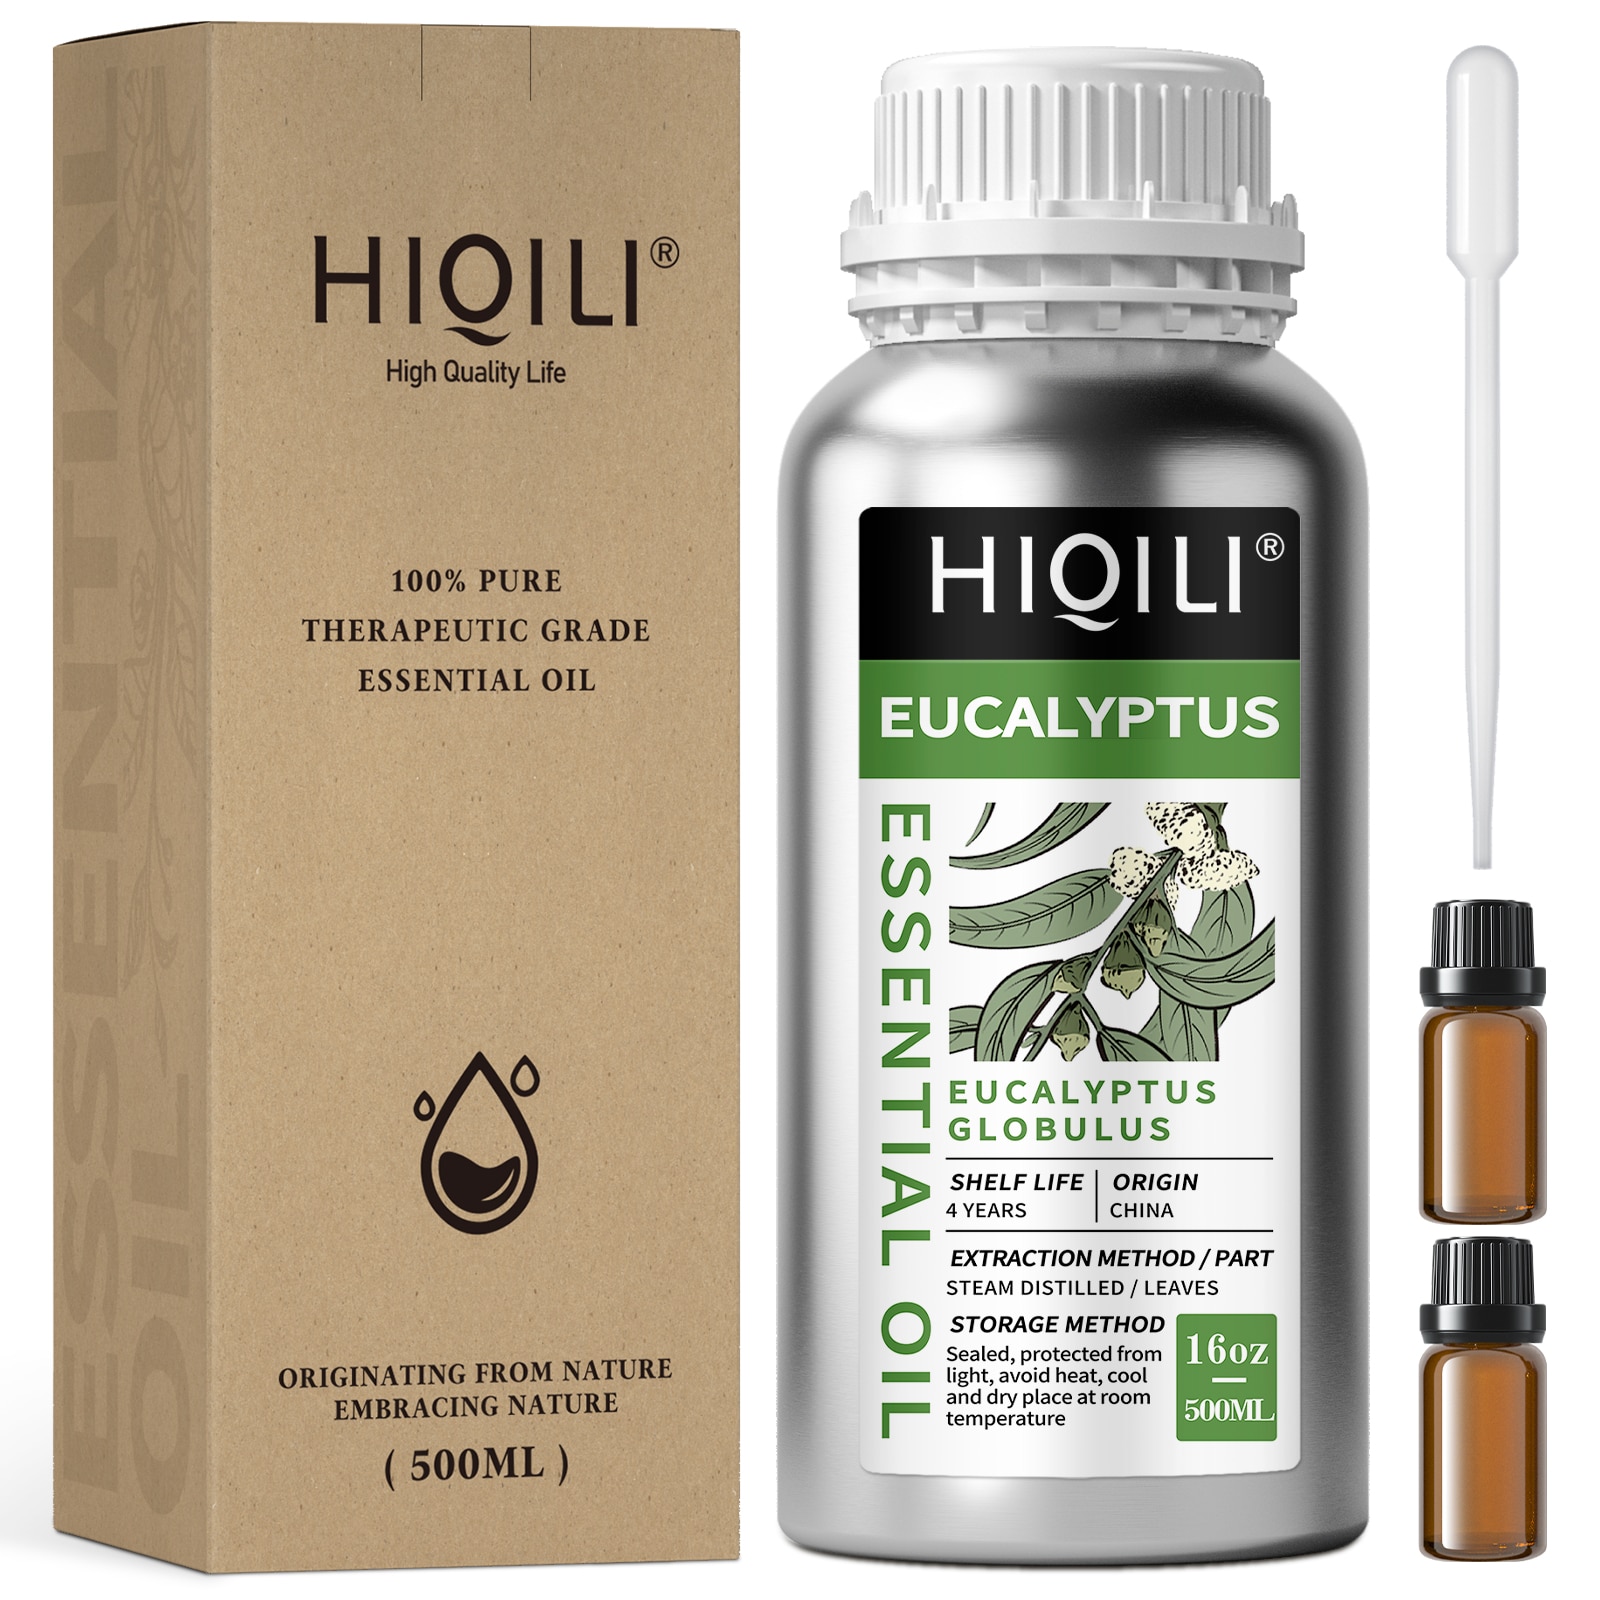 HIQILI 500ML Eucalyptus Essential Oils, 100% Pure Nature for Aromatherapy Used for Diffuser, Humidifier, Massage | Prevent Colds